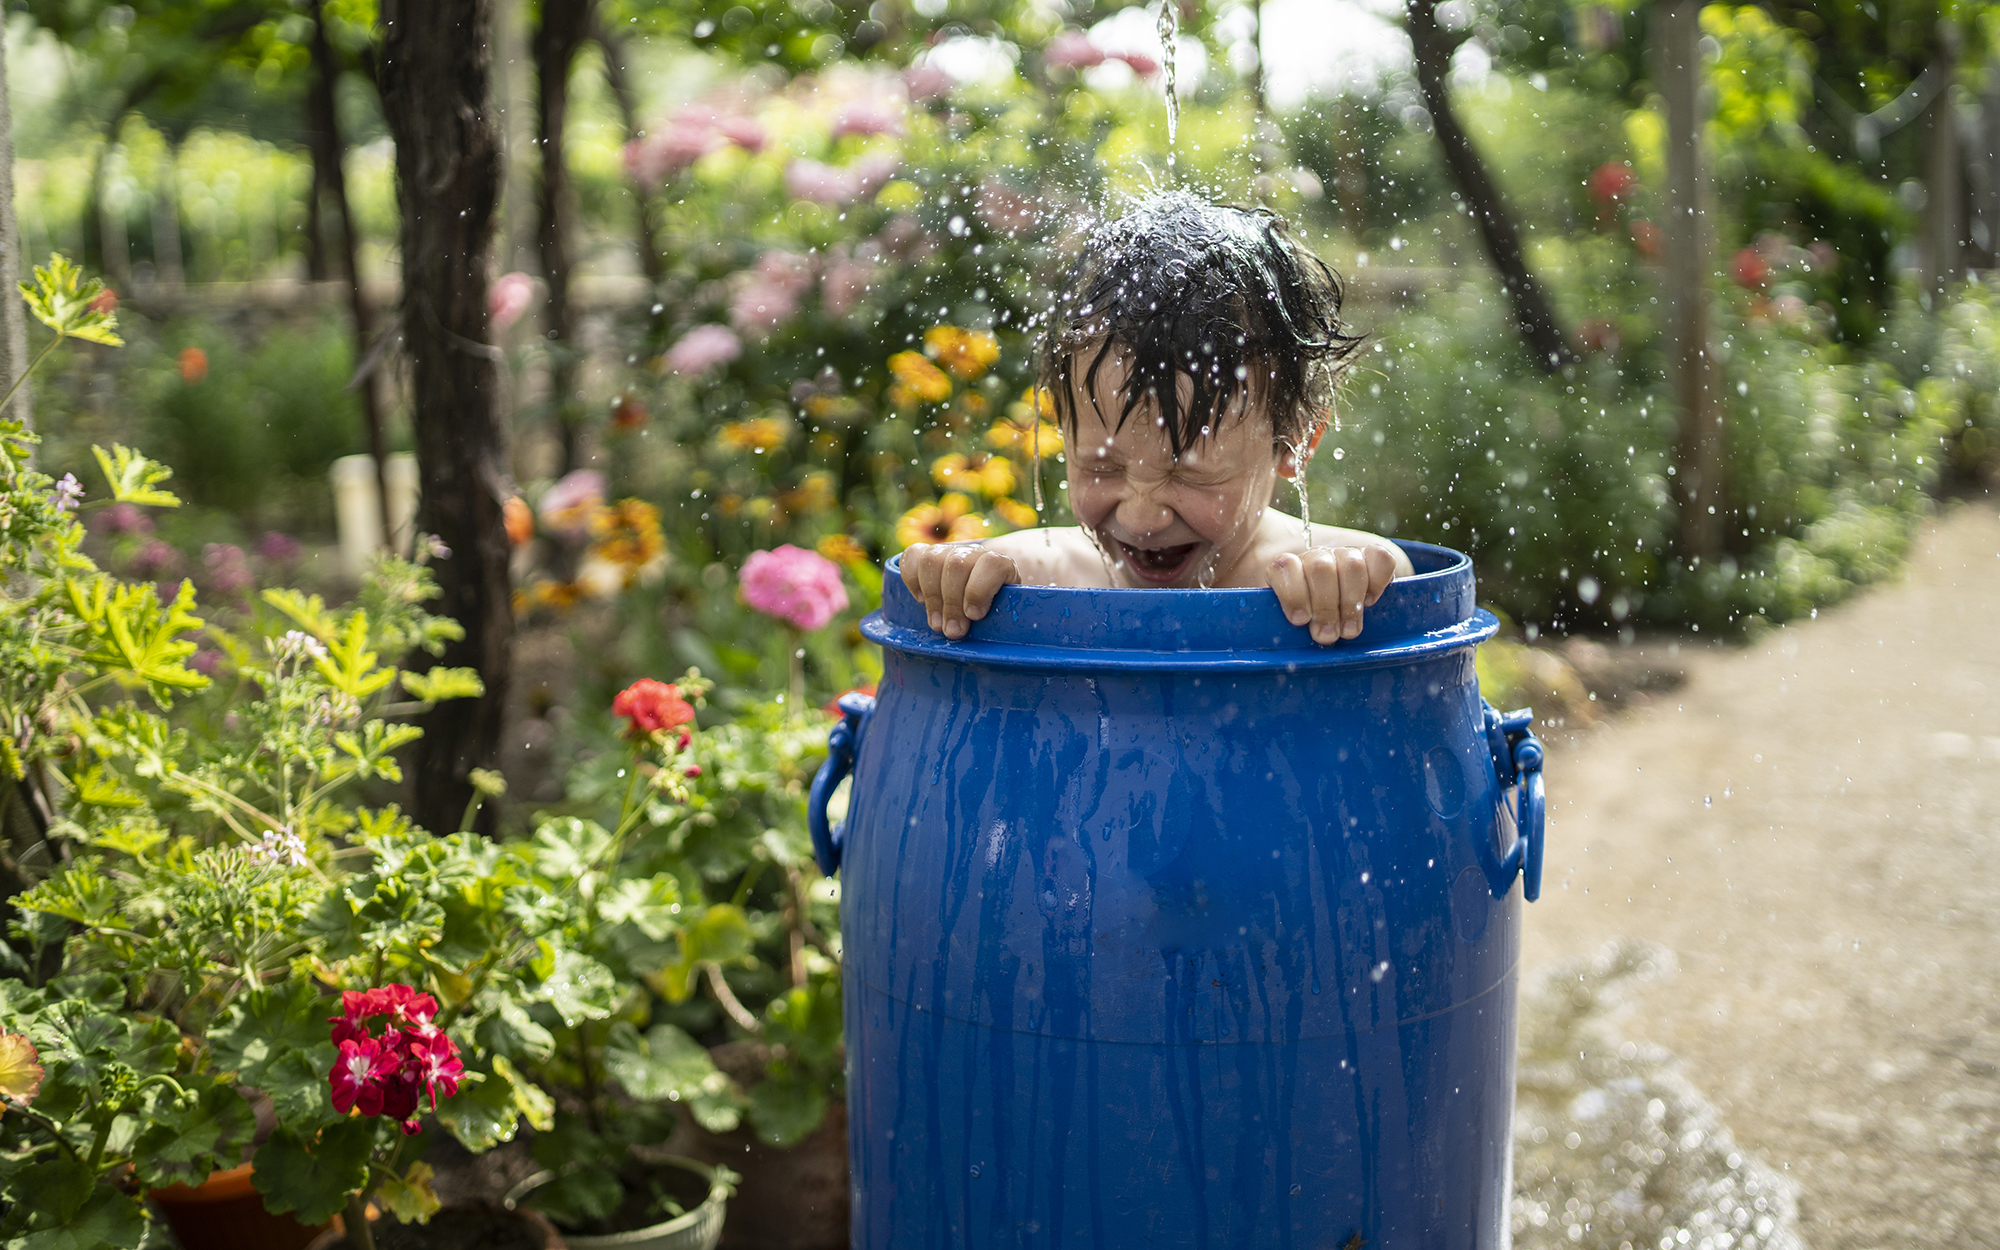 Boy having fun playing with water in the garden.